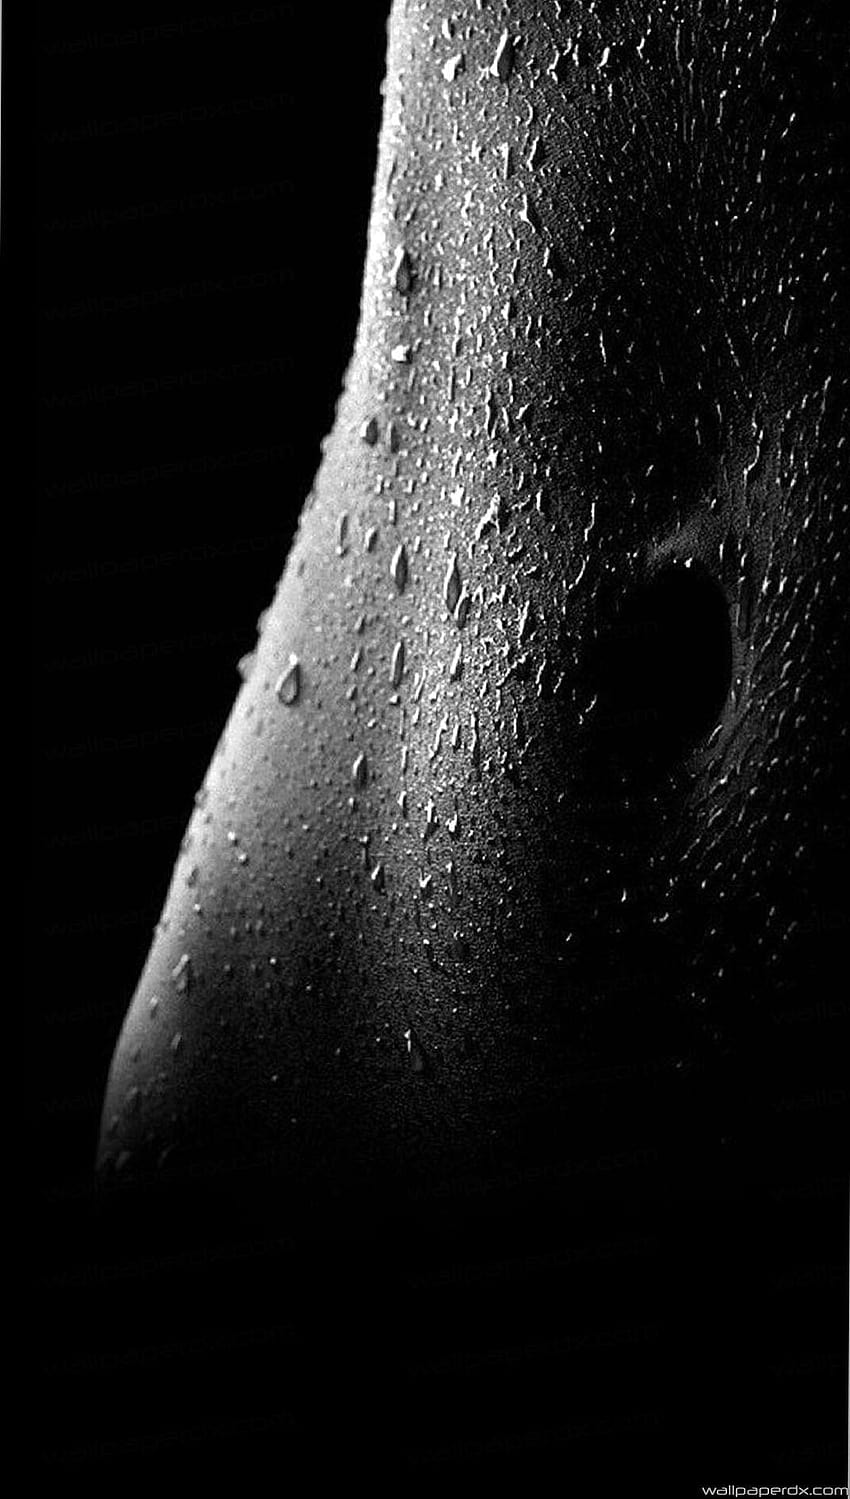 Woman Body Water Drops Black Full Android, full black android HD phone wallpaper